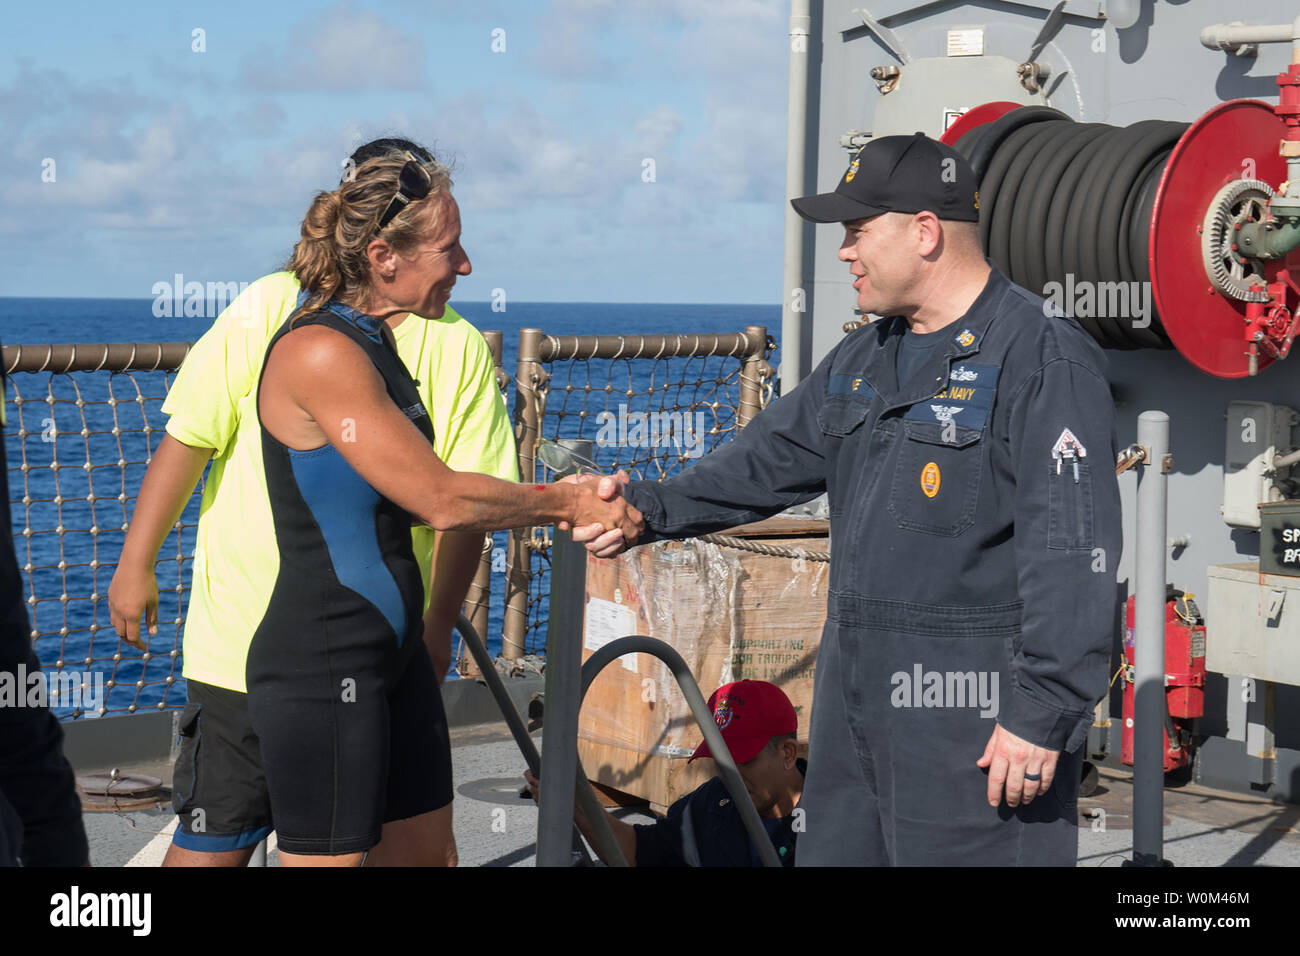 USS Ashland (LSD 48) Command Master Chief Gary Wise welcomes aboard Jennifer Appel, an American mariner who had received assistance from Ashland crew members, on October 25, 2017. Ashland, operating in the Indo-Asia-Pacific region on a routine deployment, rescued two American mariners who had been in distress for several months after their sailboat had a motor failure and had strayed well off its original course while traversing the Pacific Ocean. Photo by MC3 Jonathan Clay/U.S. Navy/UPI. Stock Photo